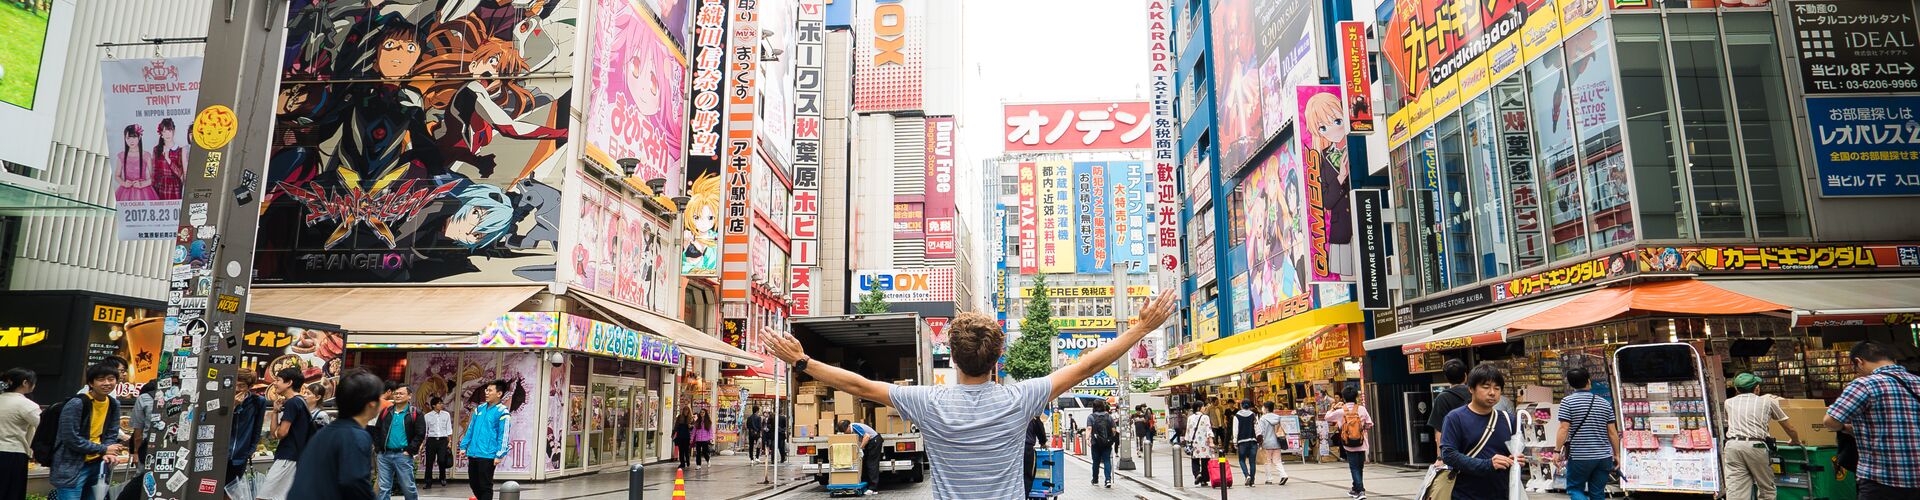 Traveller with arms spread wide in the Akihabara district in Tokyo, Japan